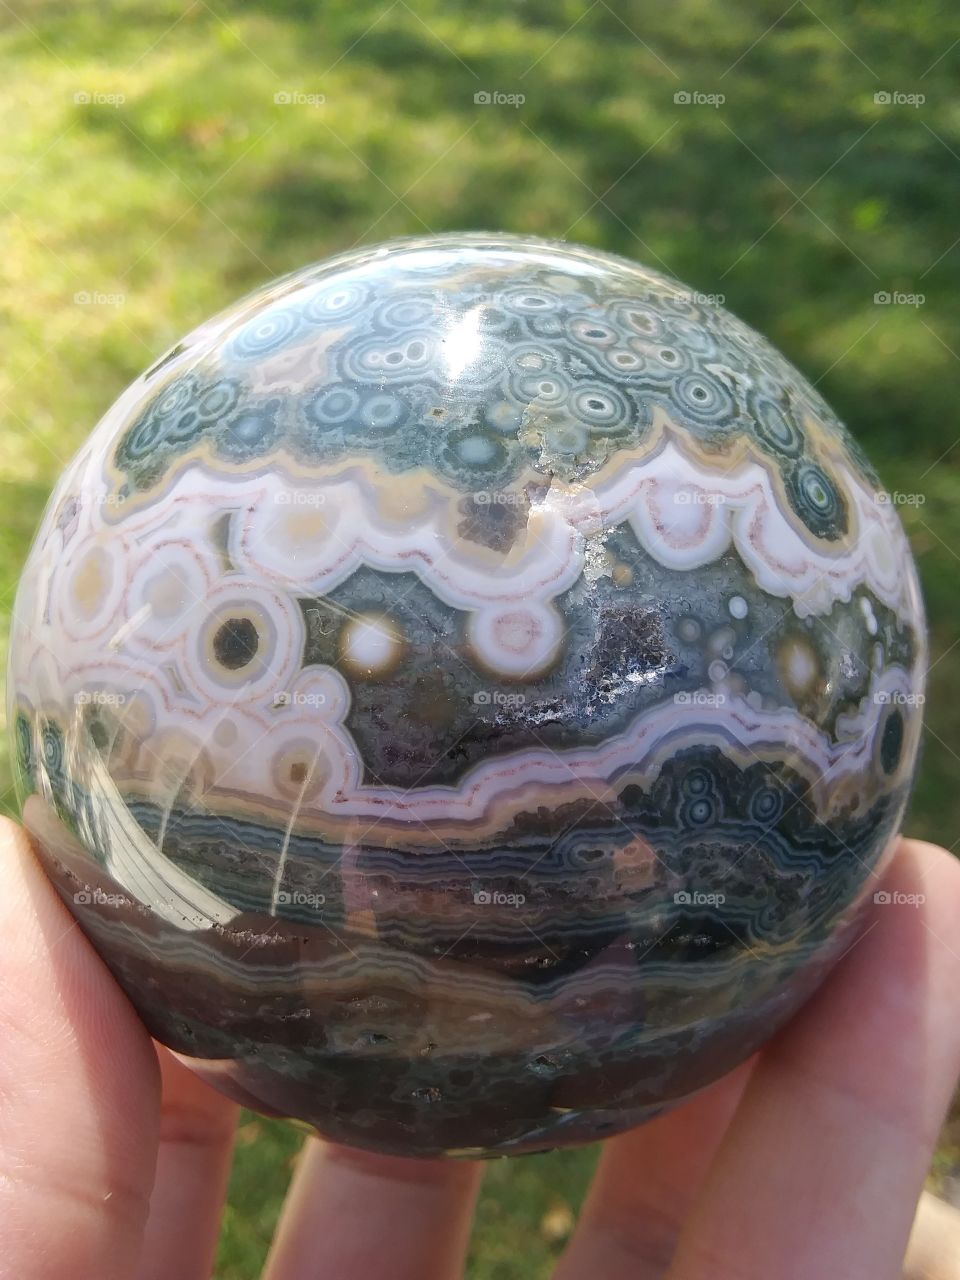 Ocean Jasper Sphere From Madagascar

This is a polished ocean jasper crystal sphere from my personal collection. Ocean Jasper is a mined out mineral. It is the only crystal that combines agate, jasper, and chalcedony into one stone.